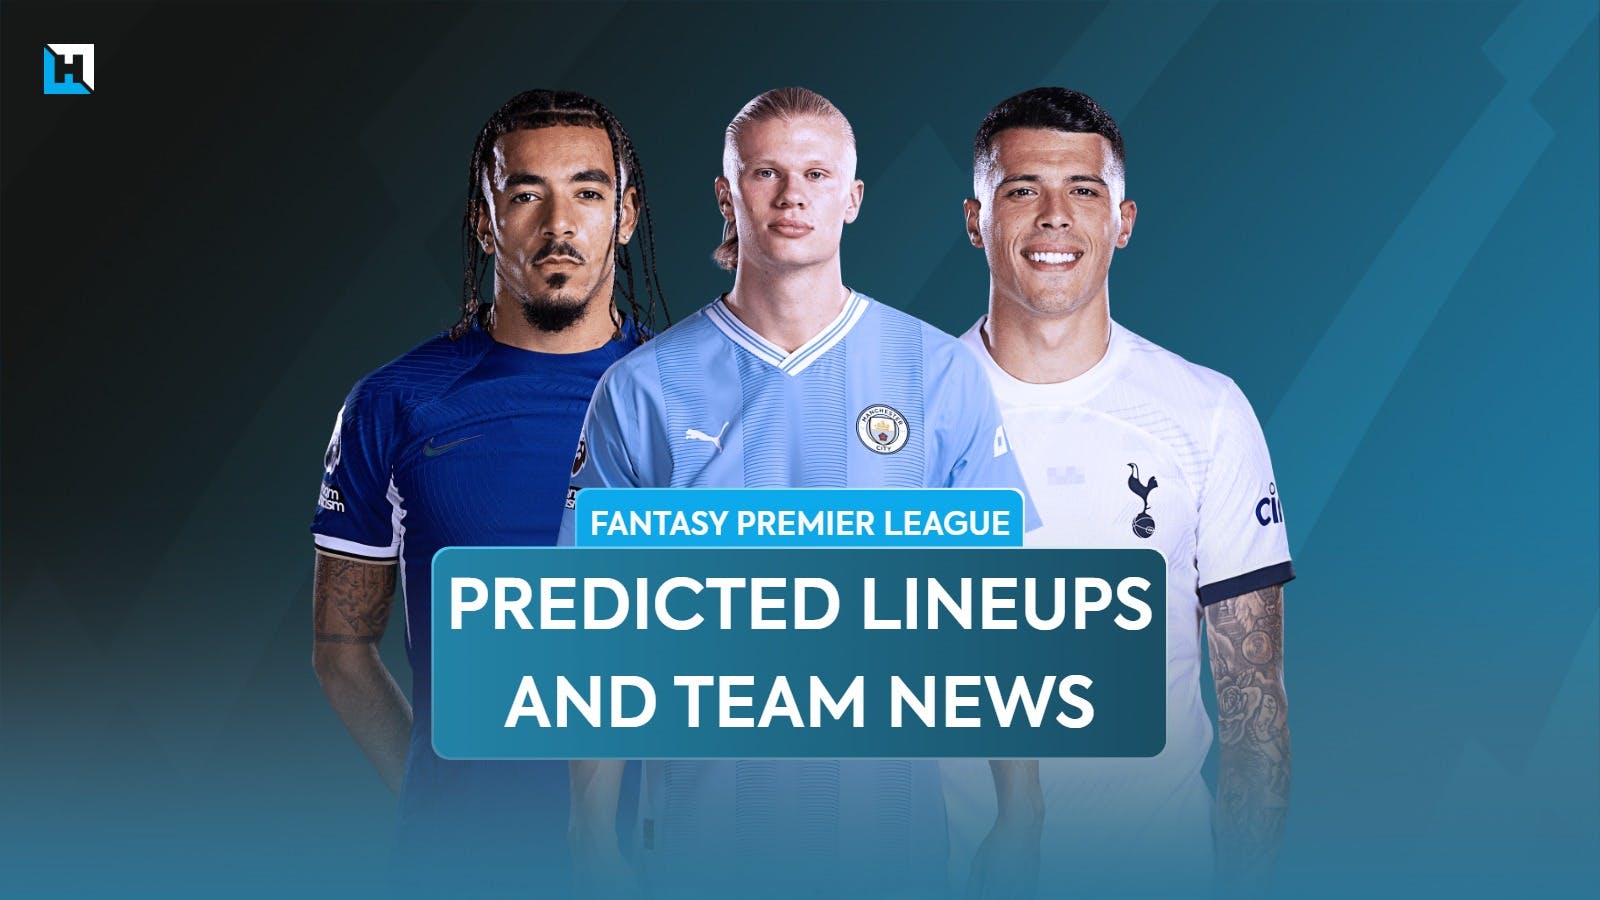 Premier League team news and predicted lineups for Gameweek 36